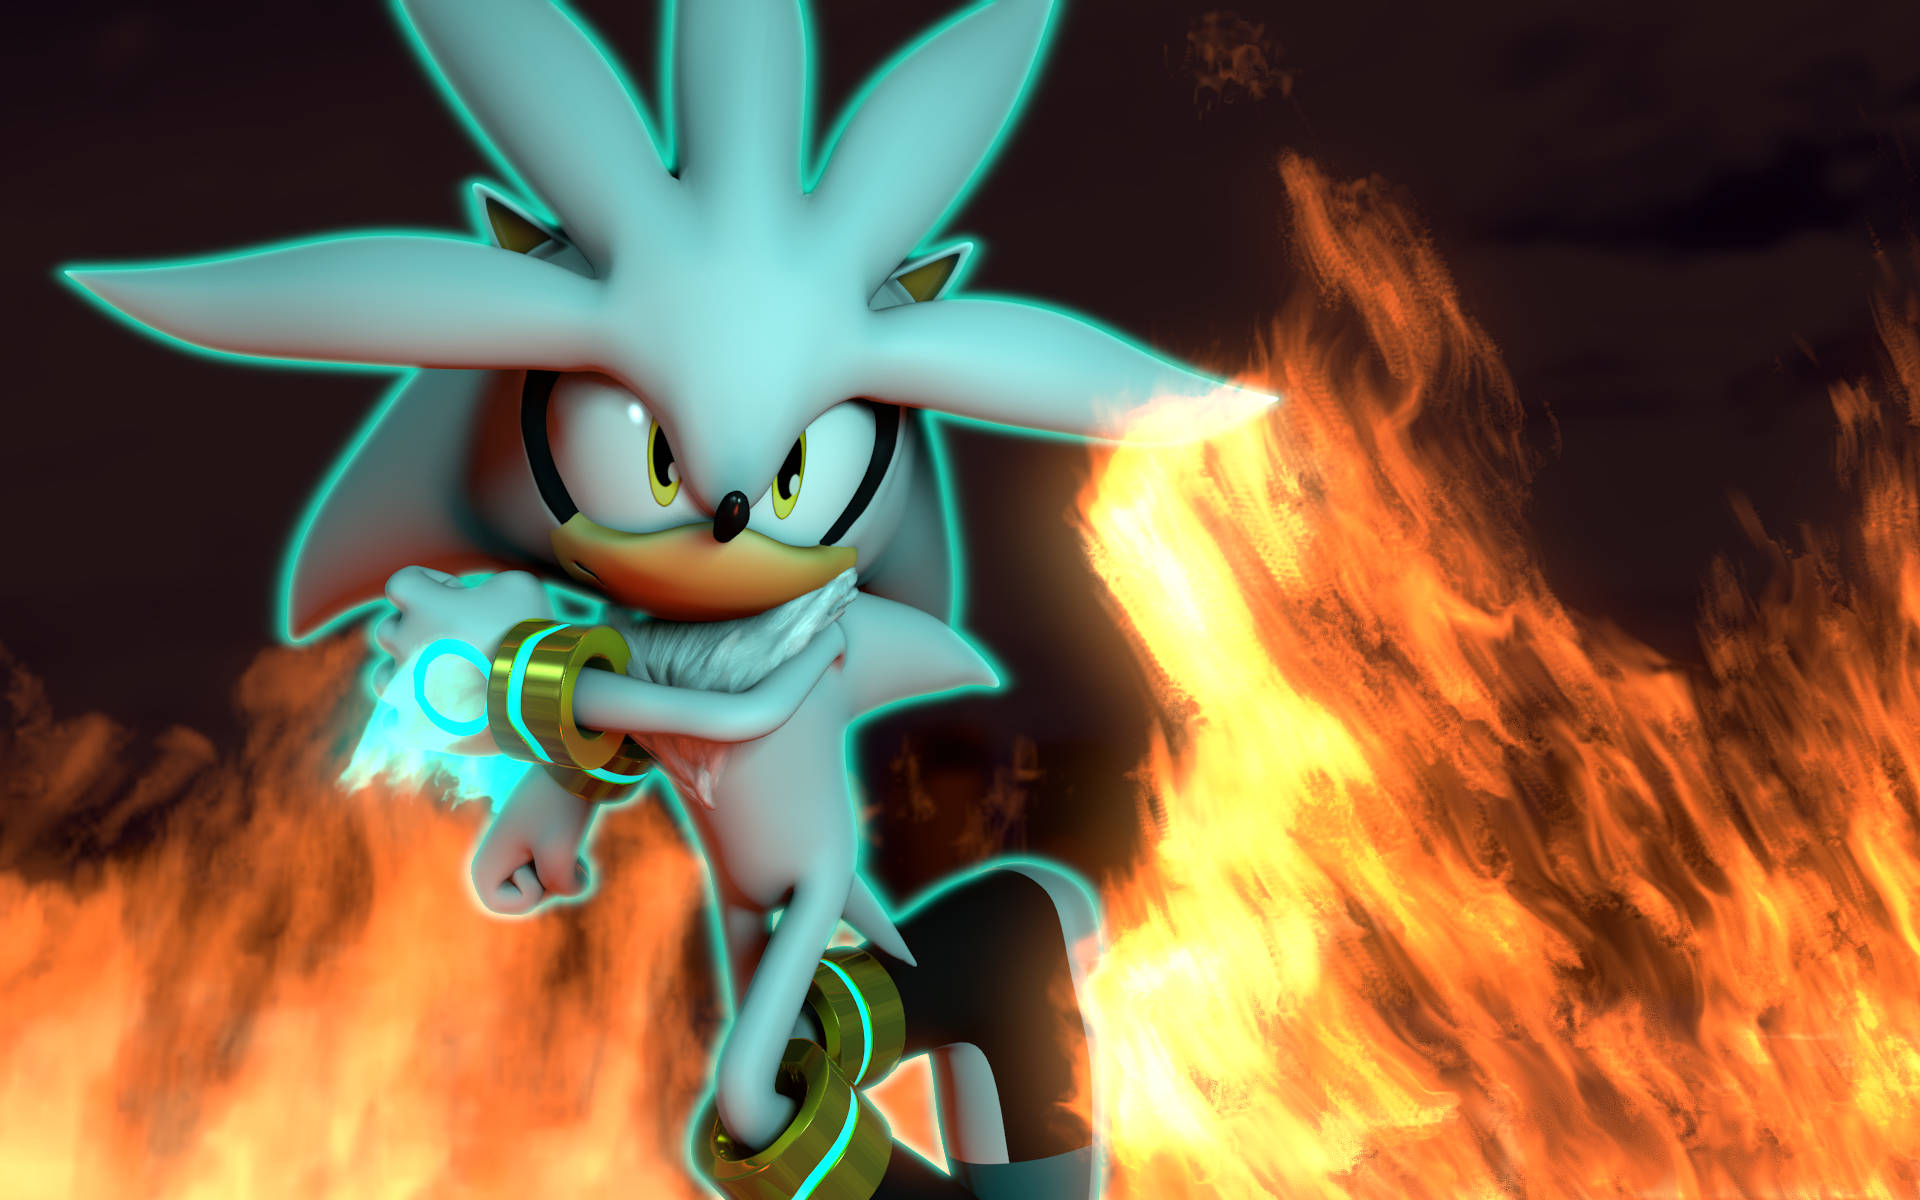 Dynamic Silver The Hedgehog In Action Background